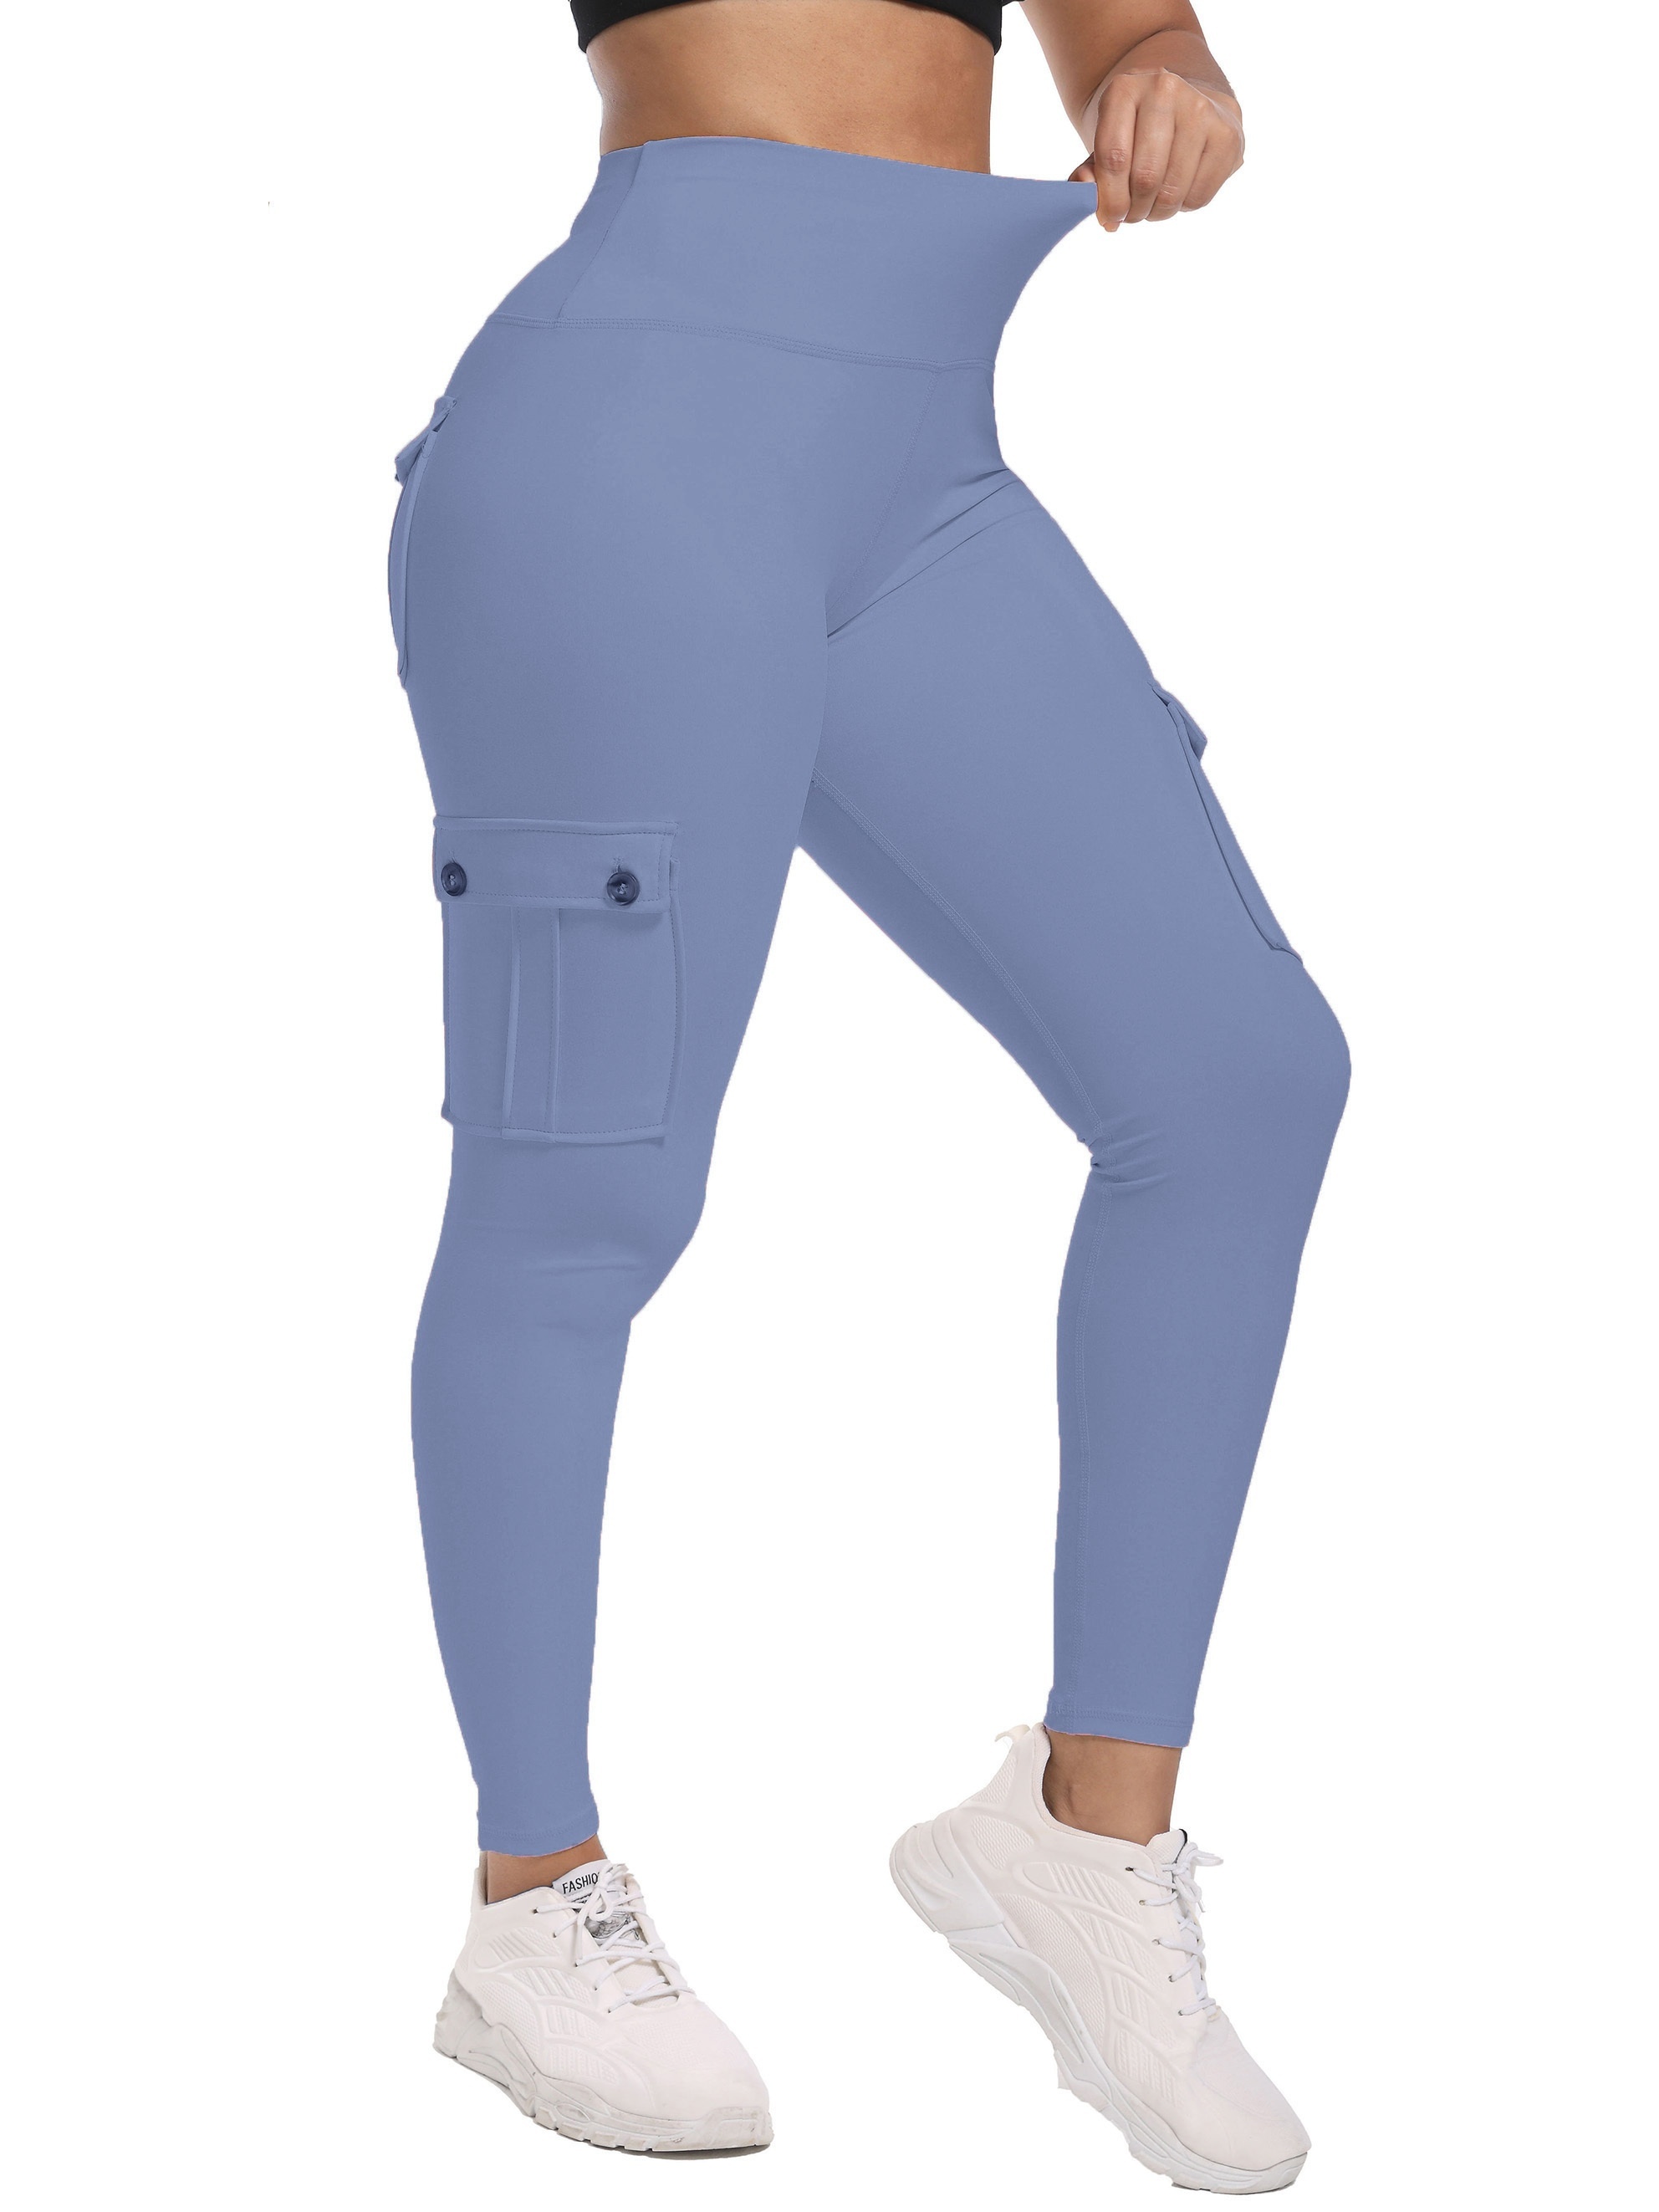 iloveSIA Leggings with Pockets for Women, Workout Capris Legging, Yoga  Pants Butt Lift High Waisted Tummy Control